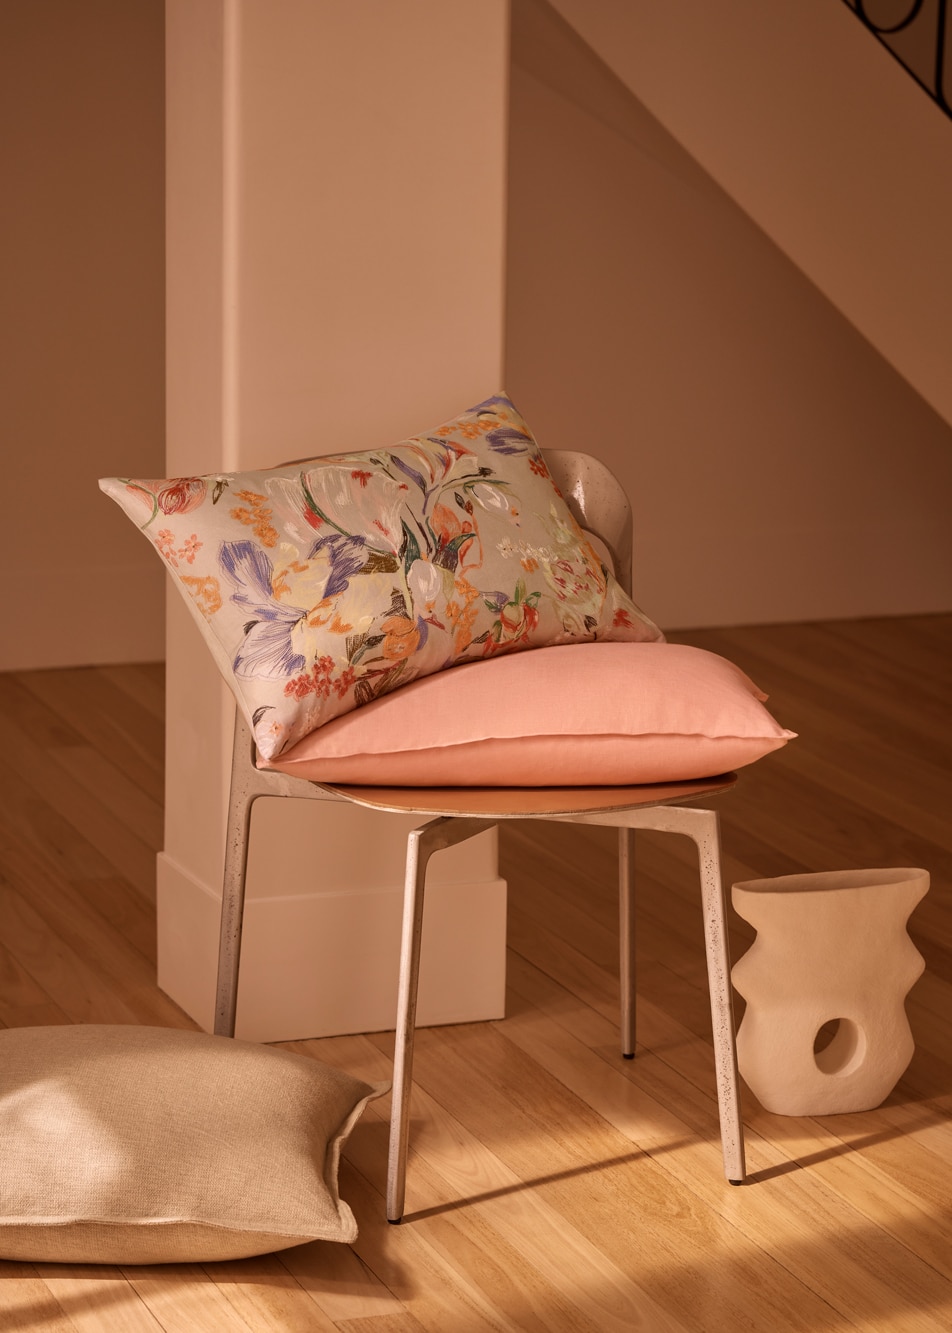 A floral cushion and a pink cushion sit on top of a chair in a room with a timber floor.